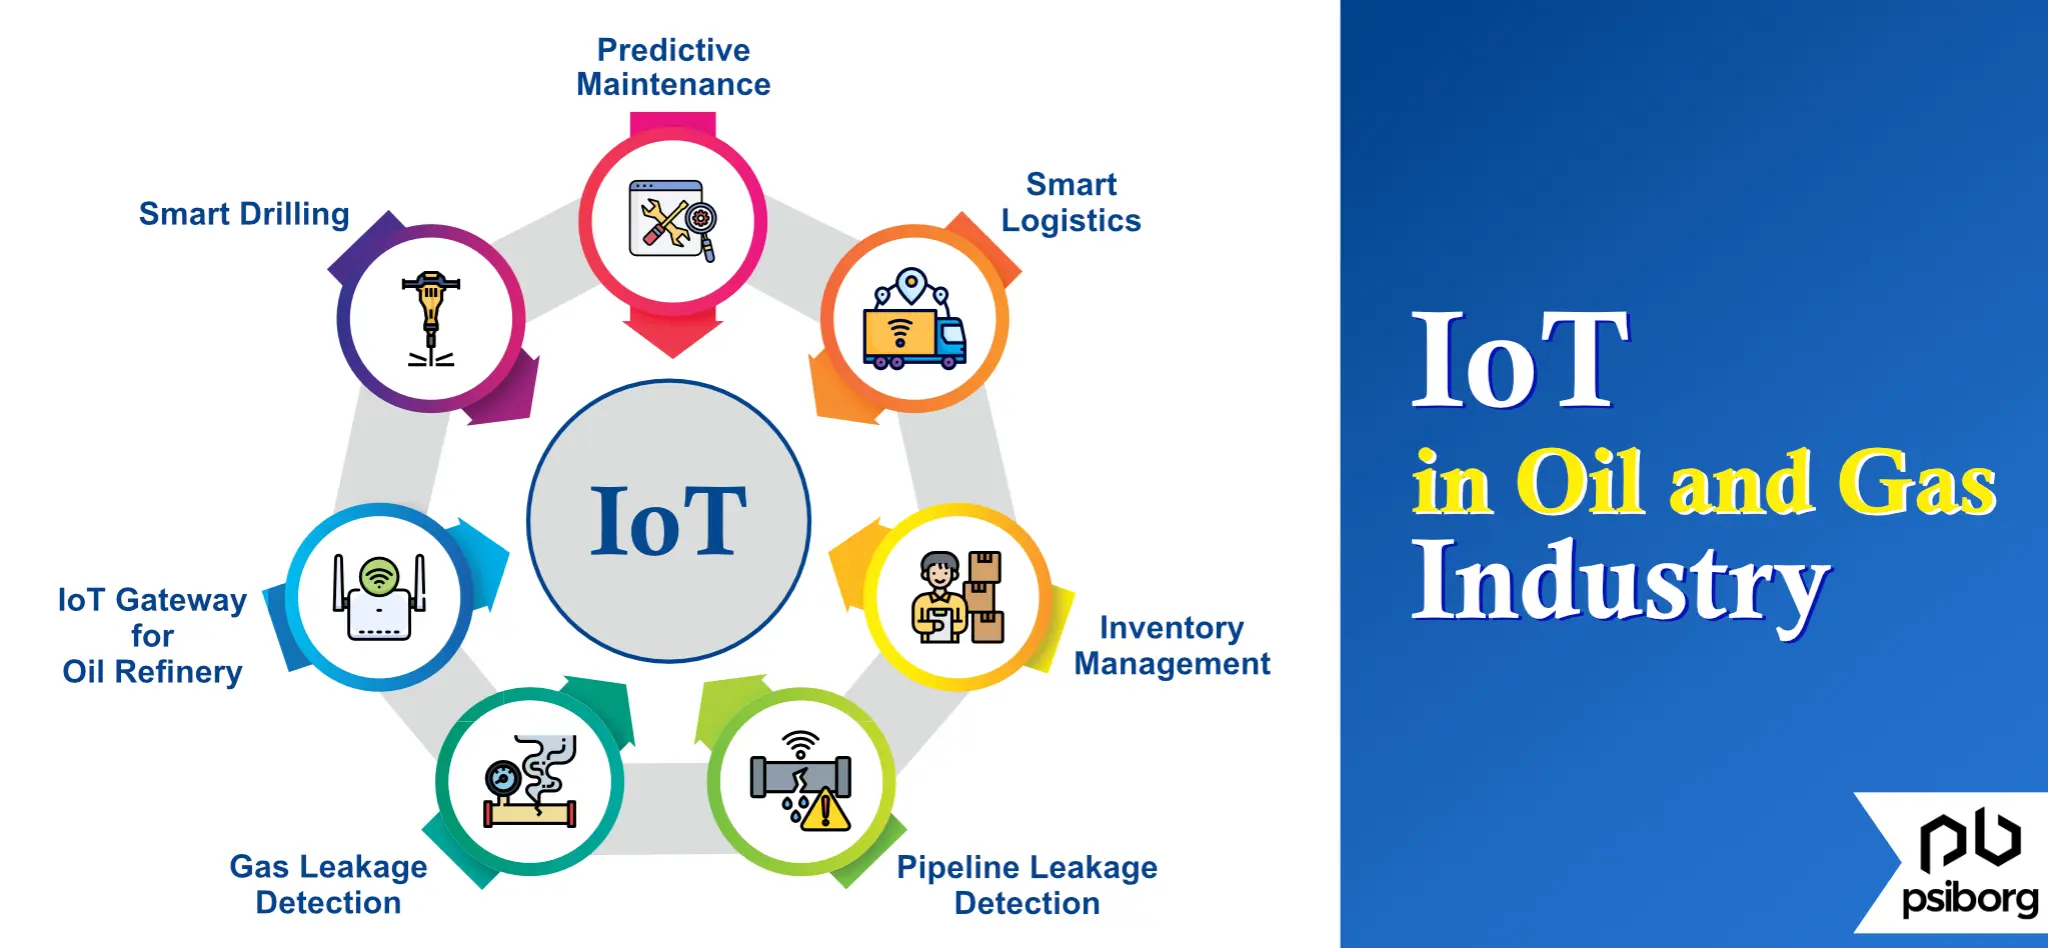 IoT in Oil and Gas industry